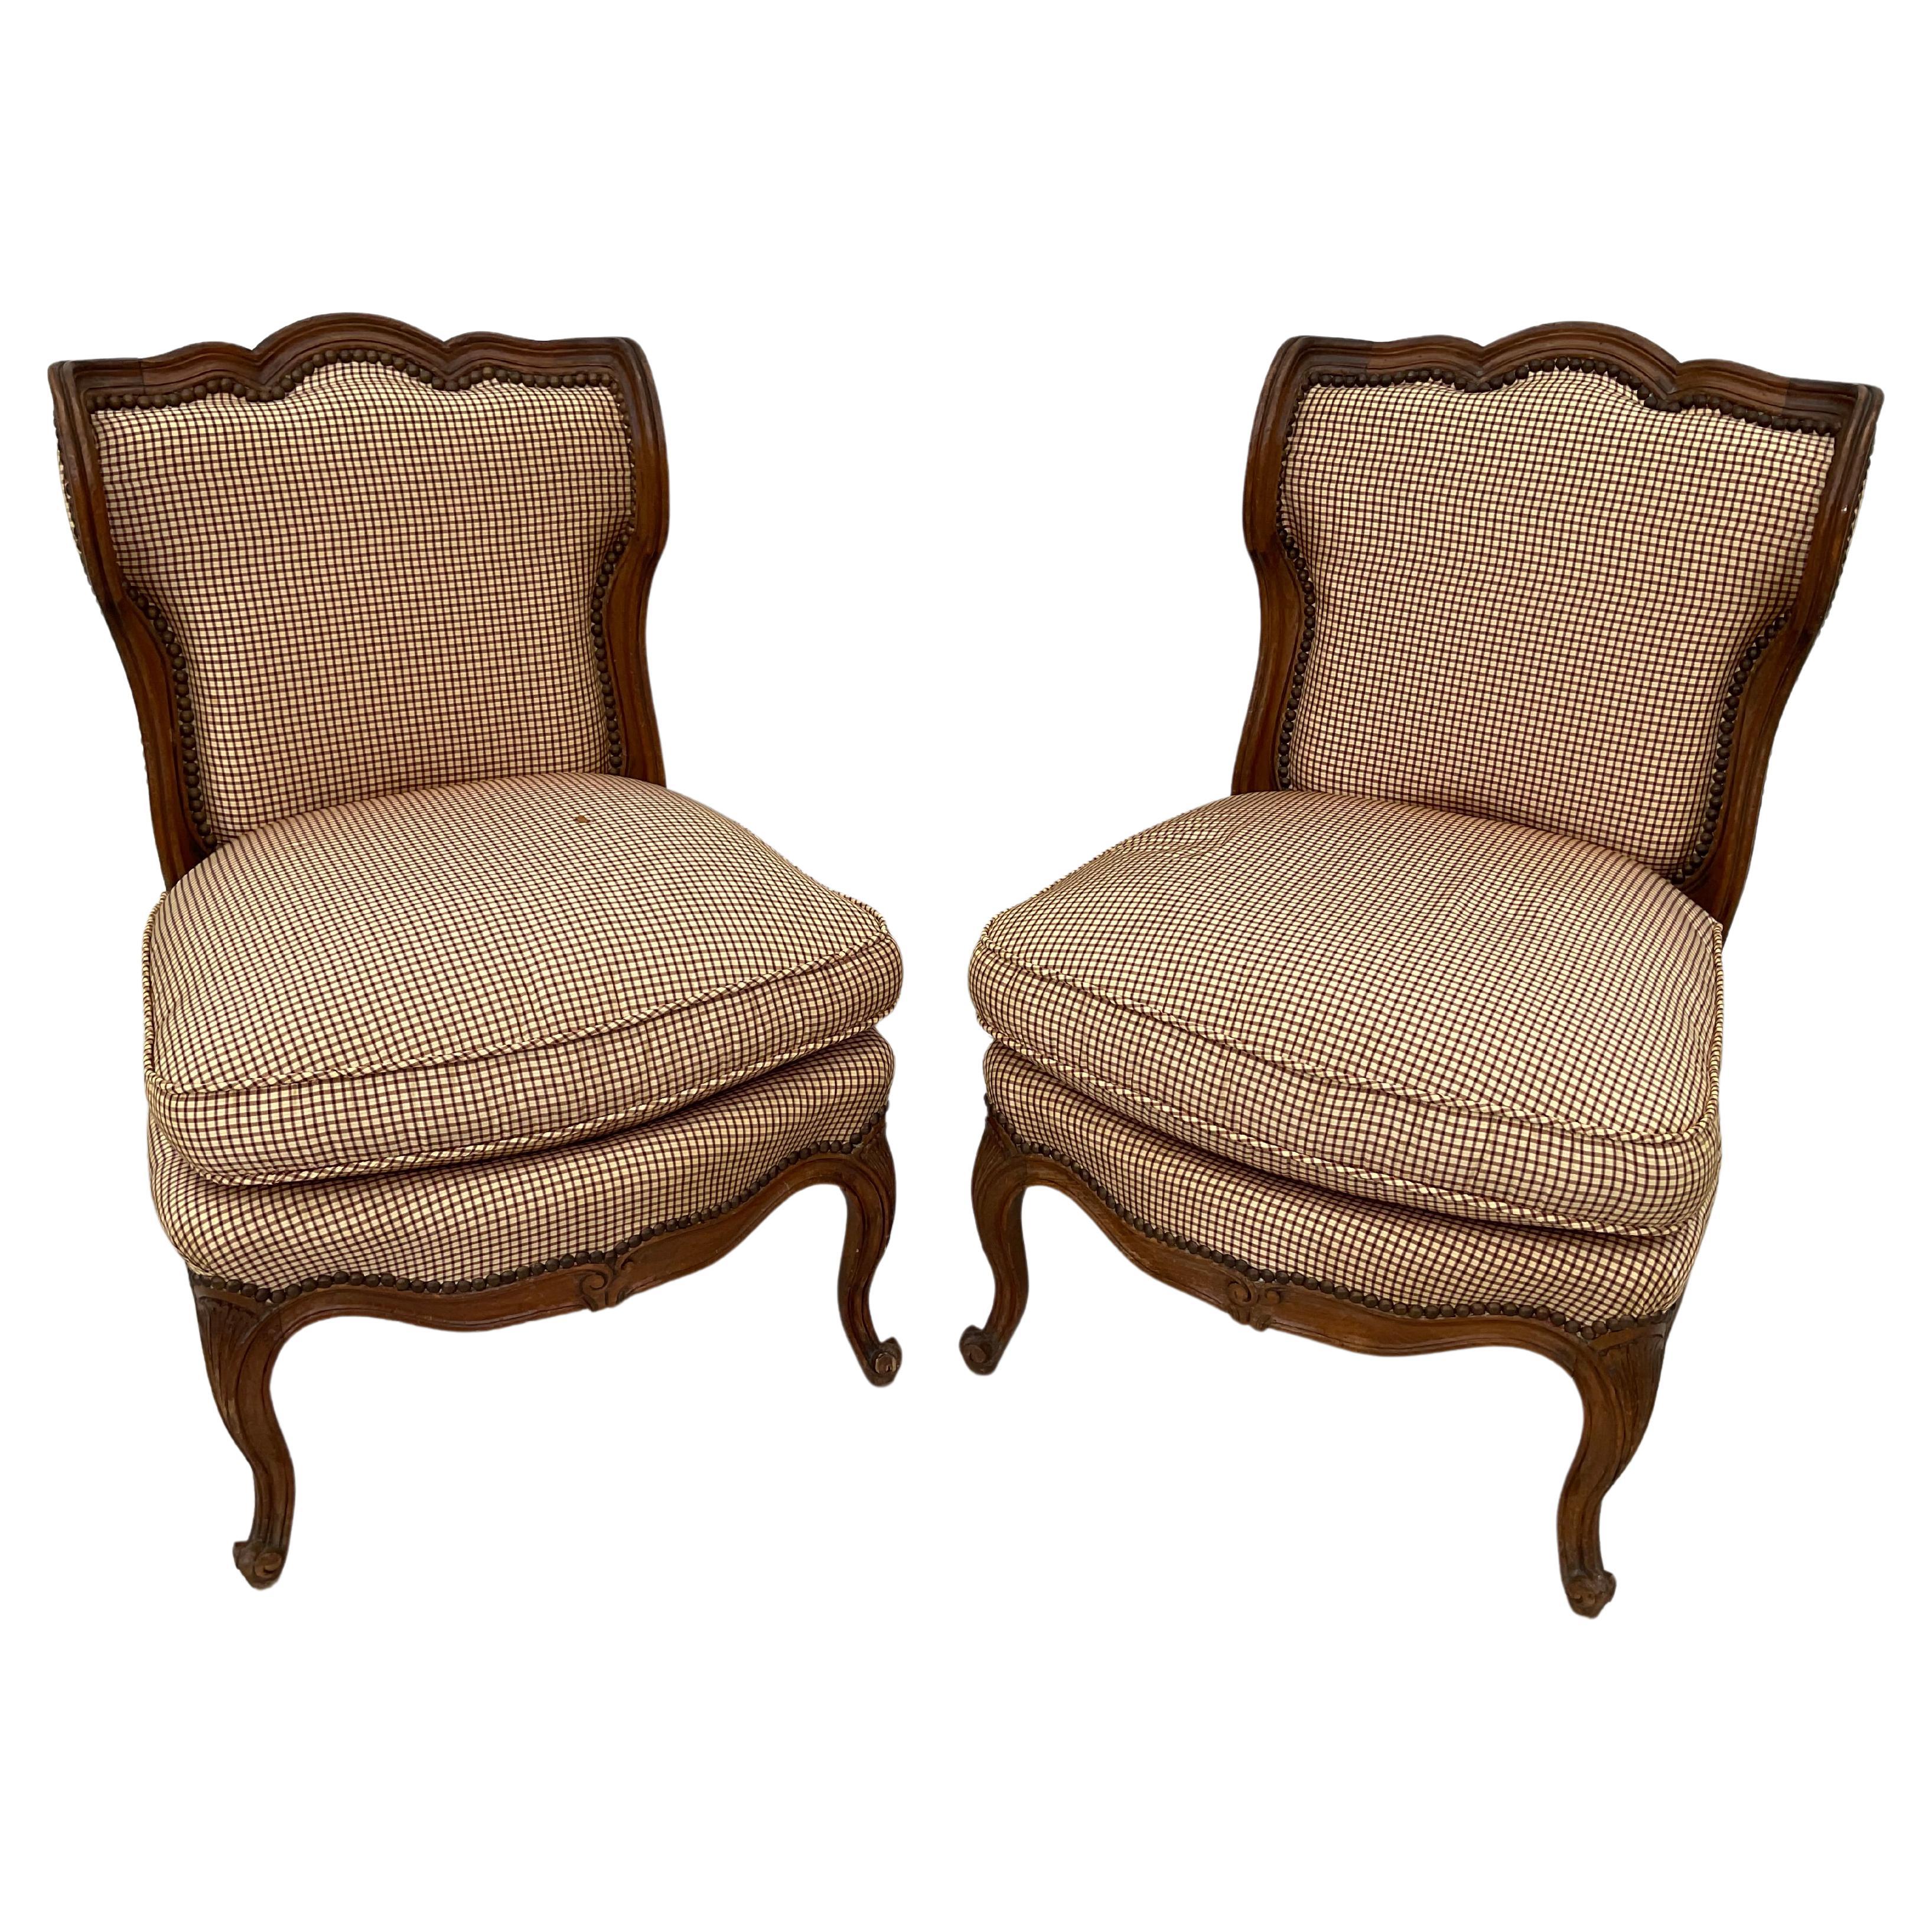 French Provincial Pair Of French Country Slipper Chairs For Sale